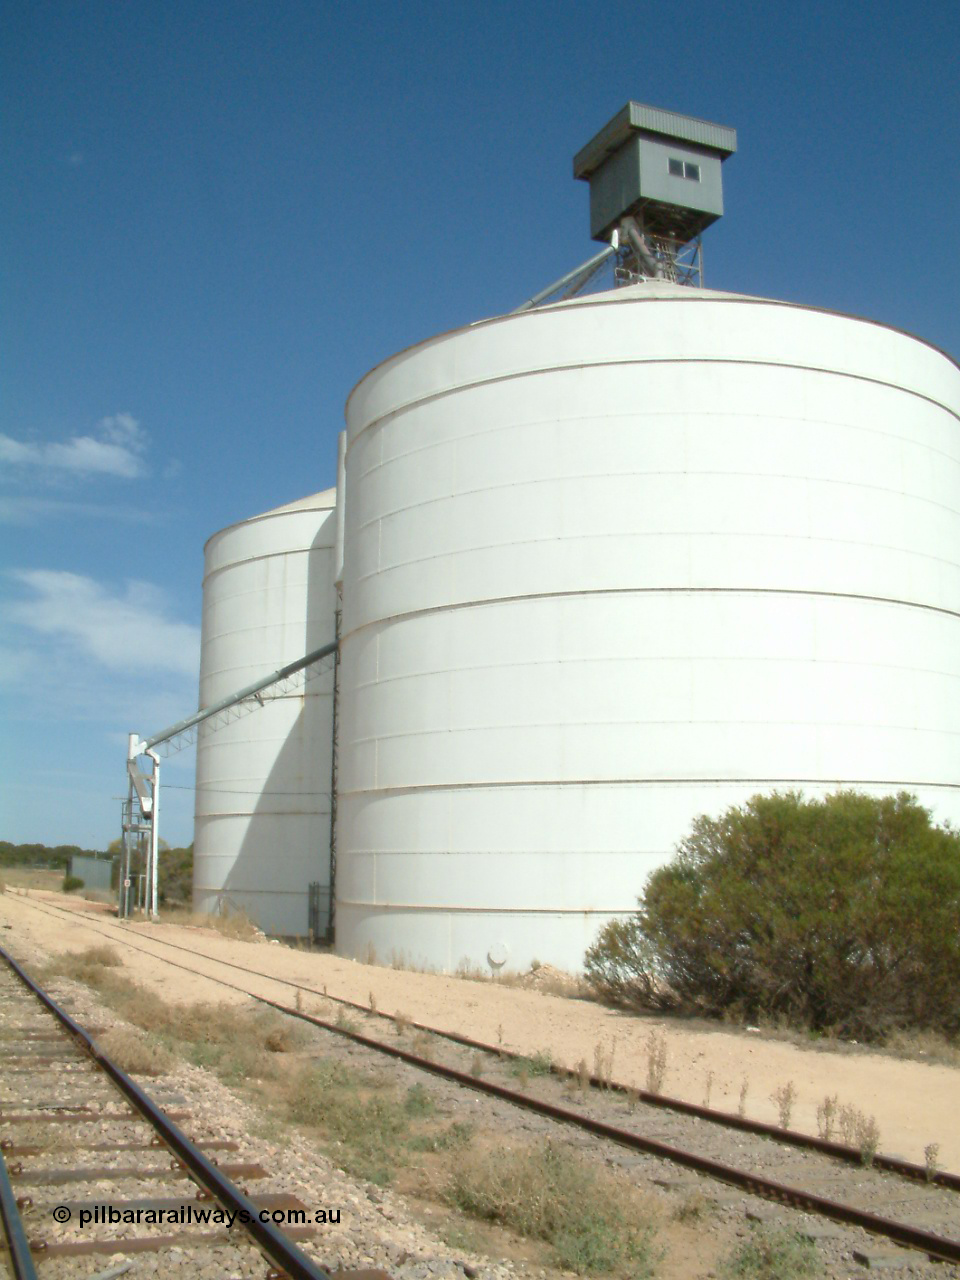 030405 140252
Kyancutta, yard view of the Ascom Jumbo silo complex and outflow spout, looking south, 5th April 2003.
